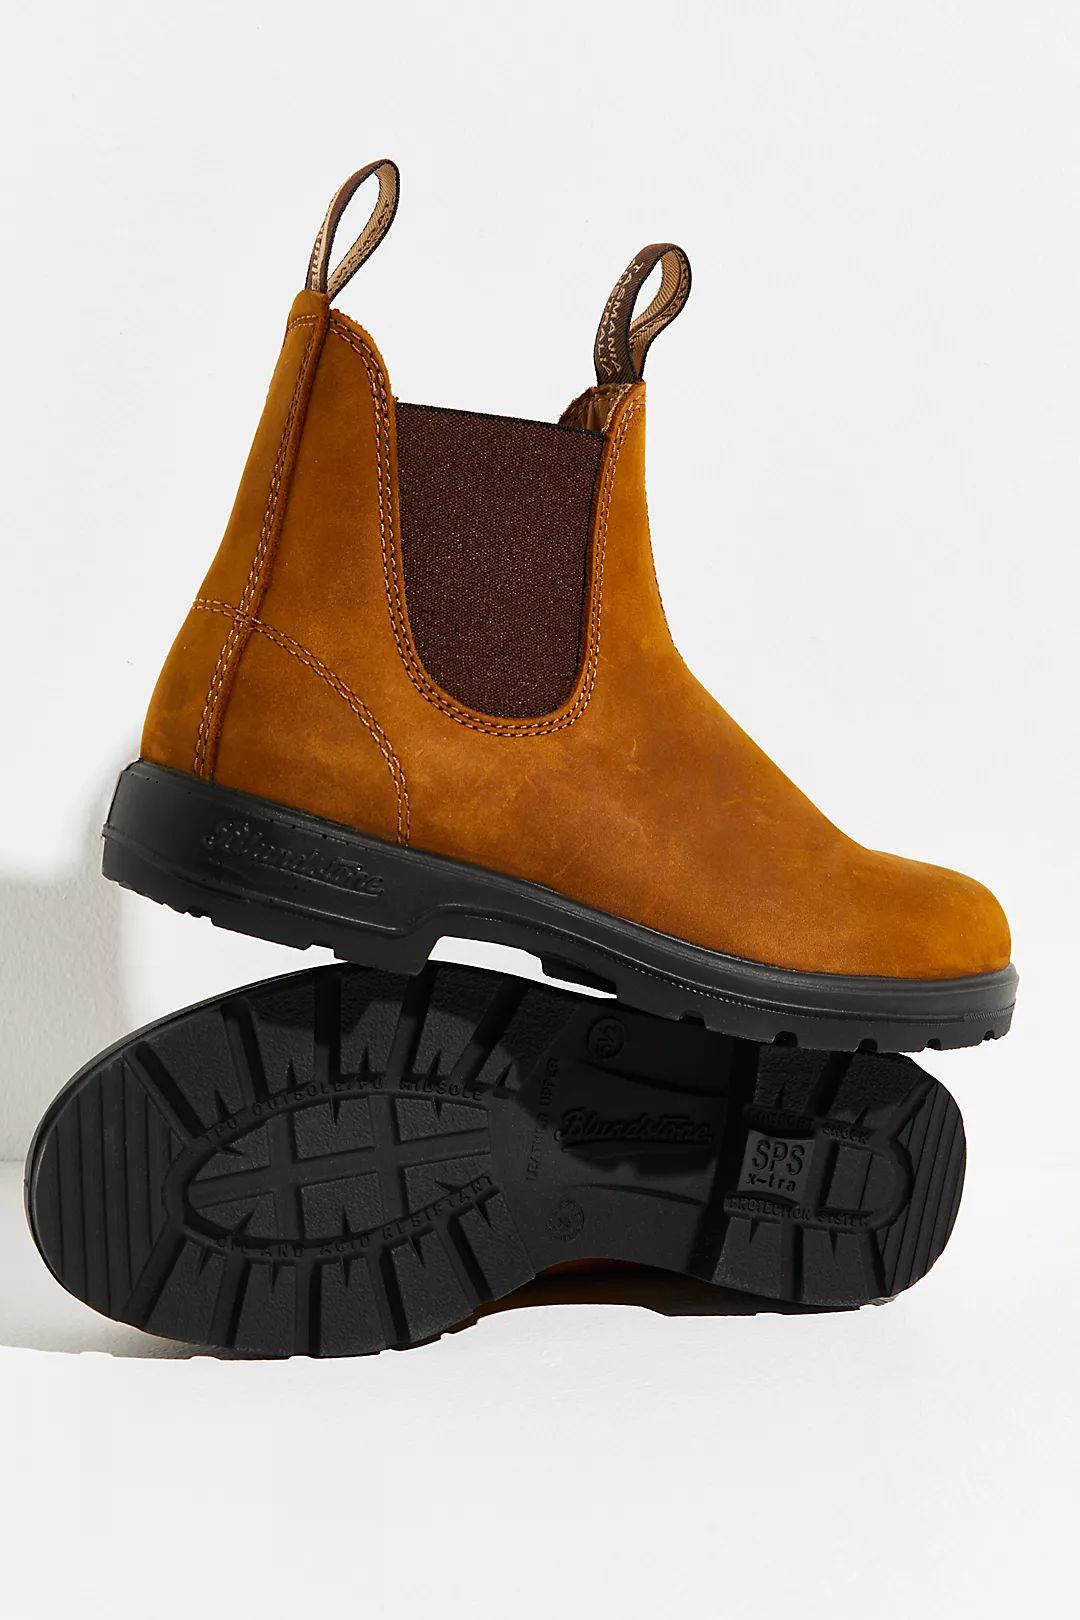 Blundstone Classic 550 Chelsea Boots | Free People (Global - UK&FR Excluded)